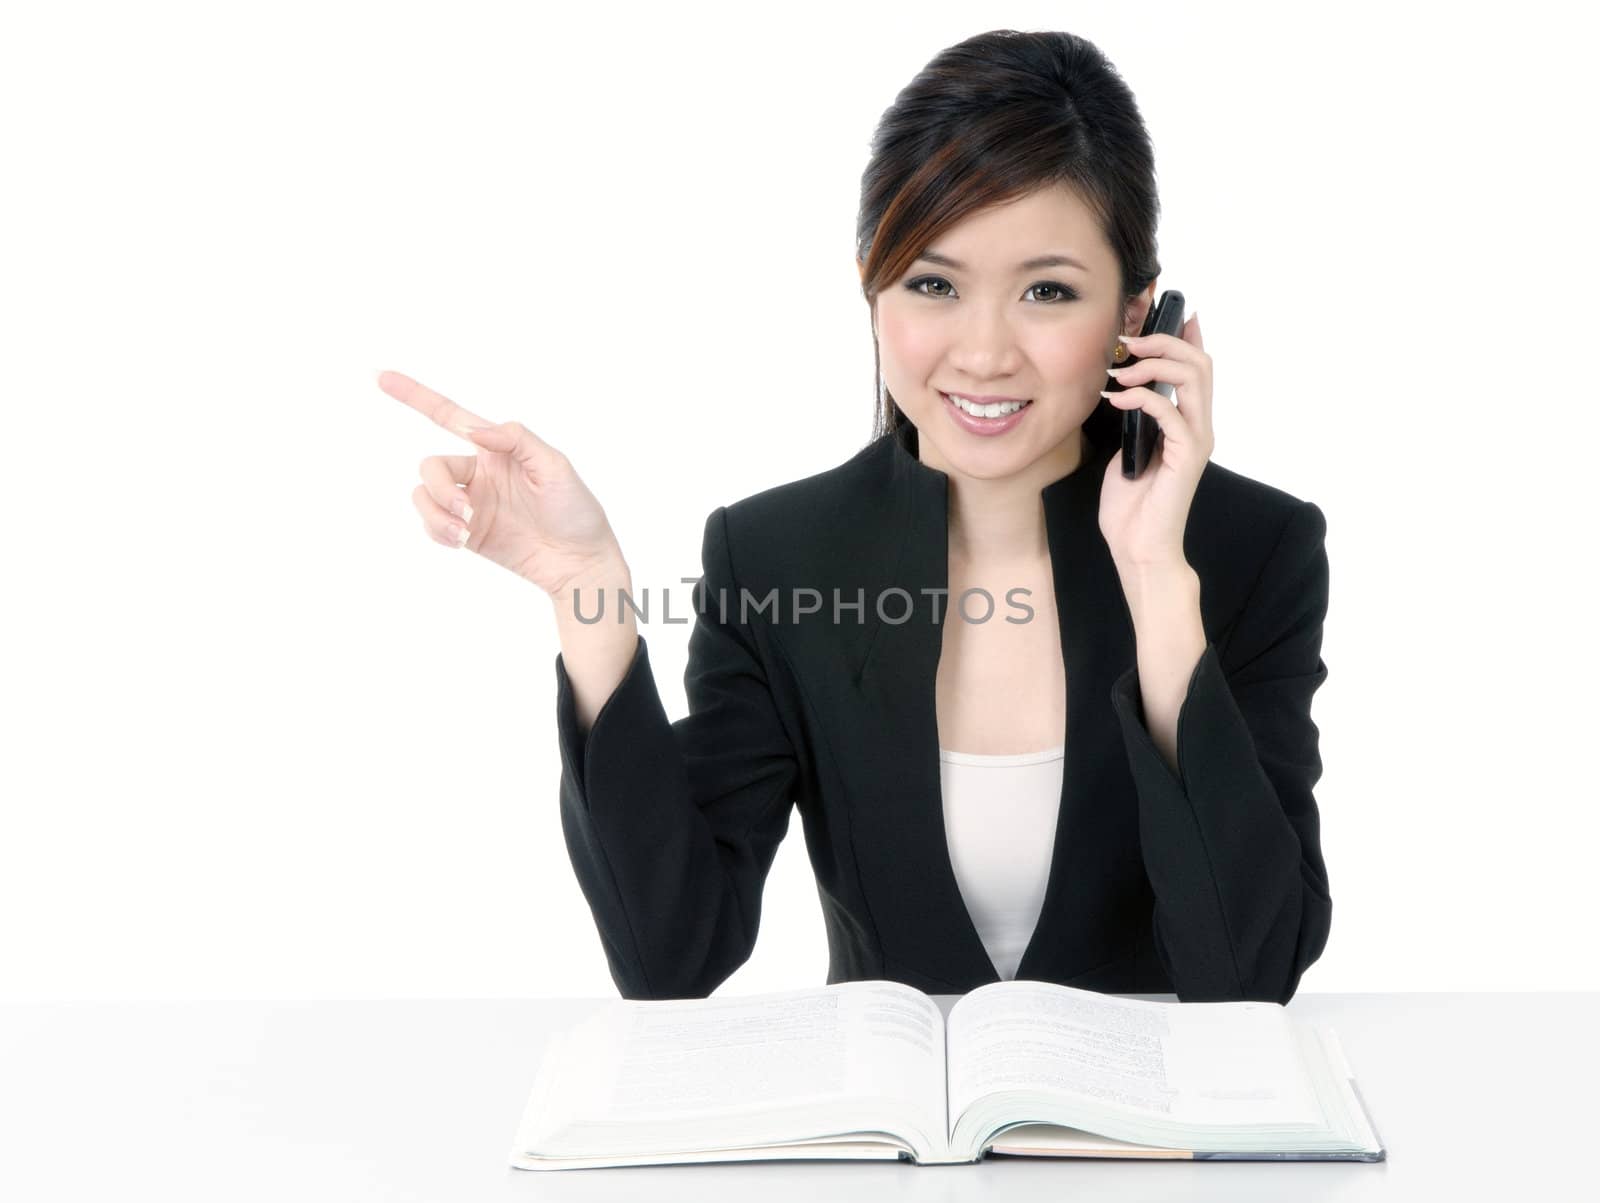 Portrait of an attractive young businesswoman talking on cellphone and pointing towards copypace, isolated on white background.